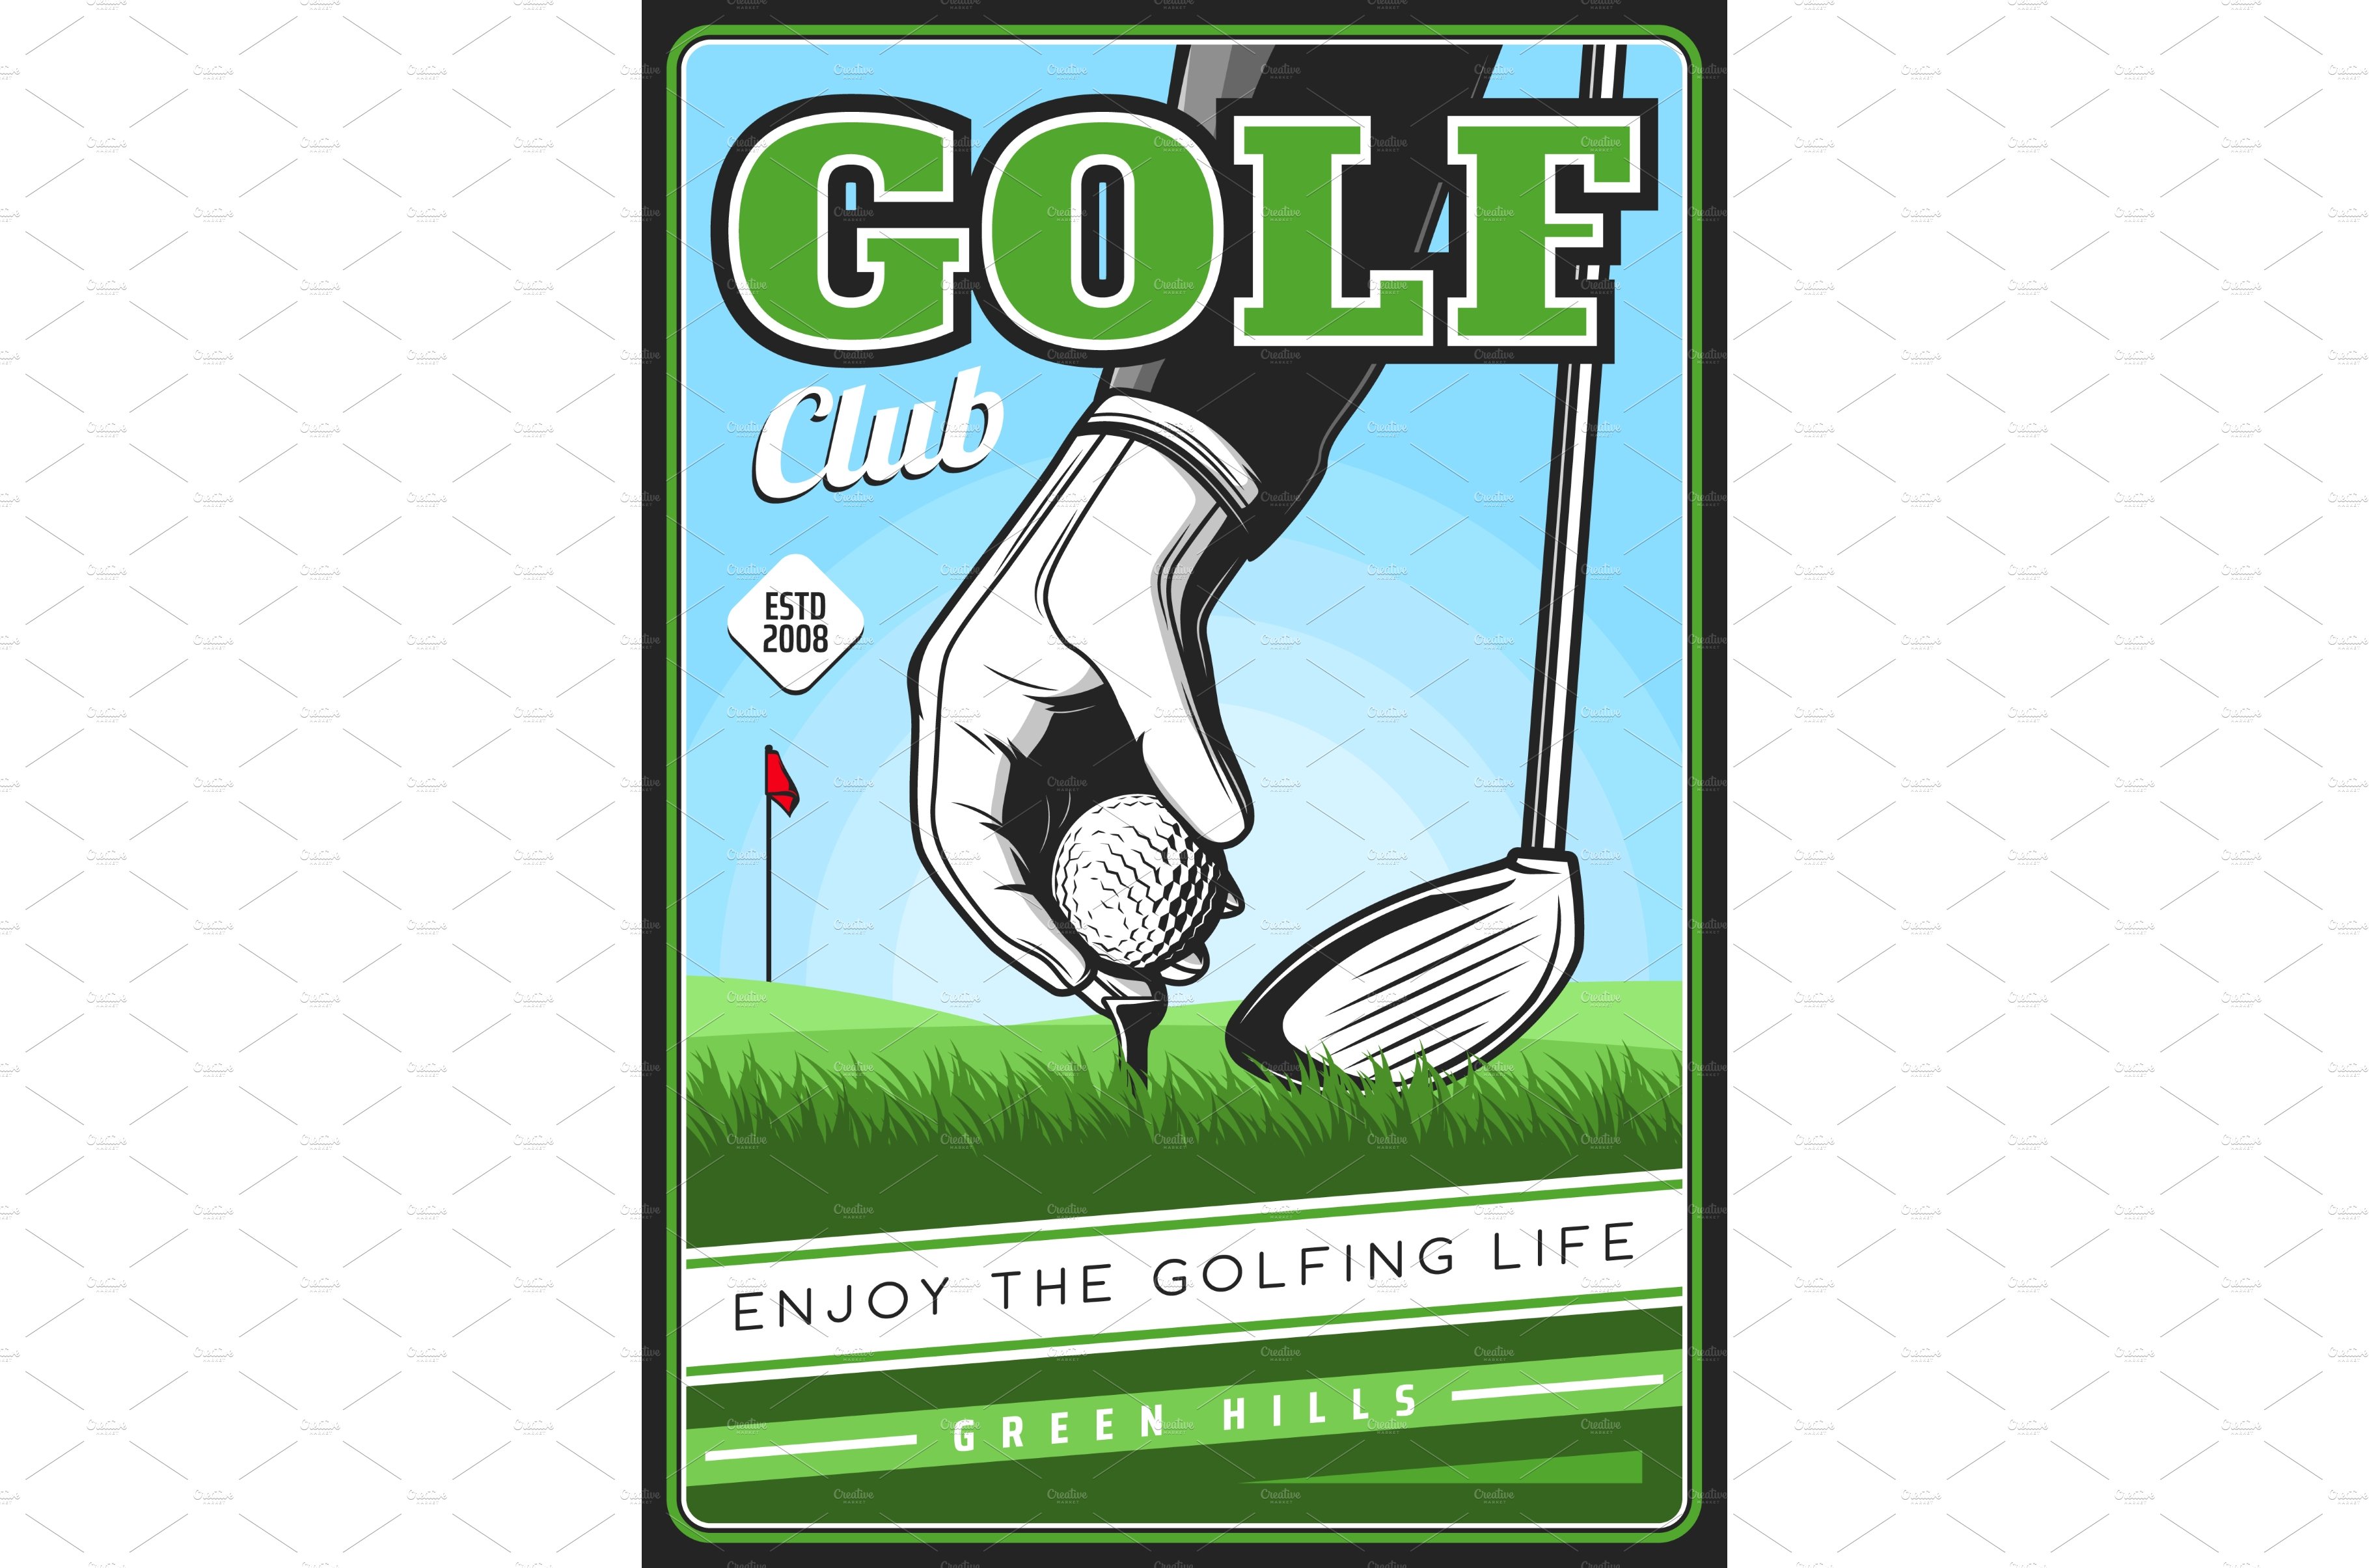 Golf club poster, golfing sport cover image.